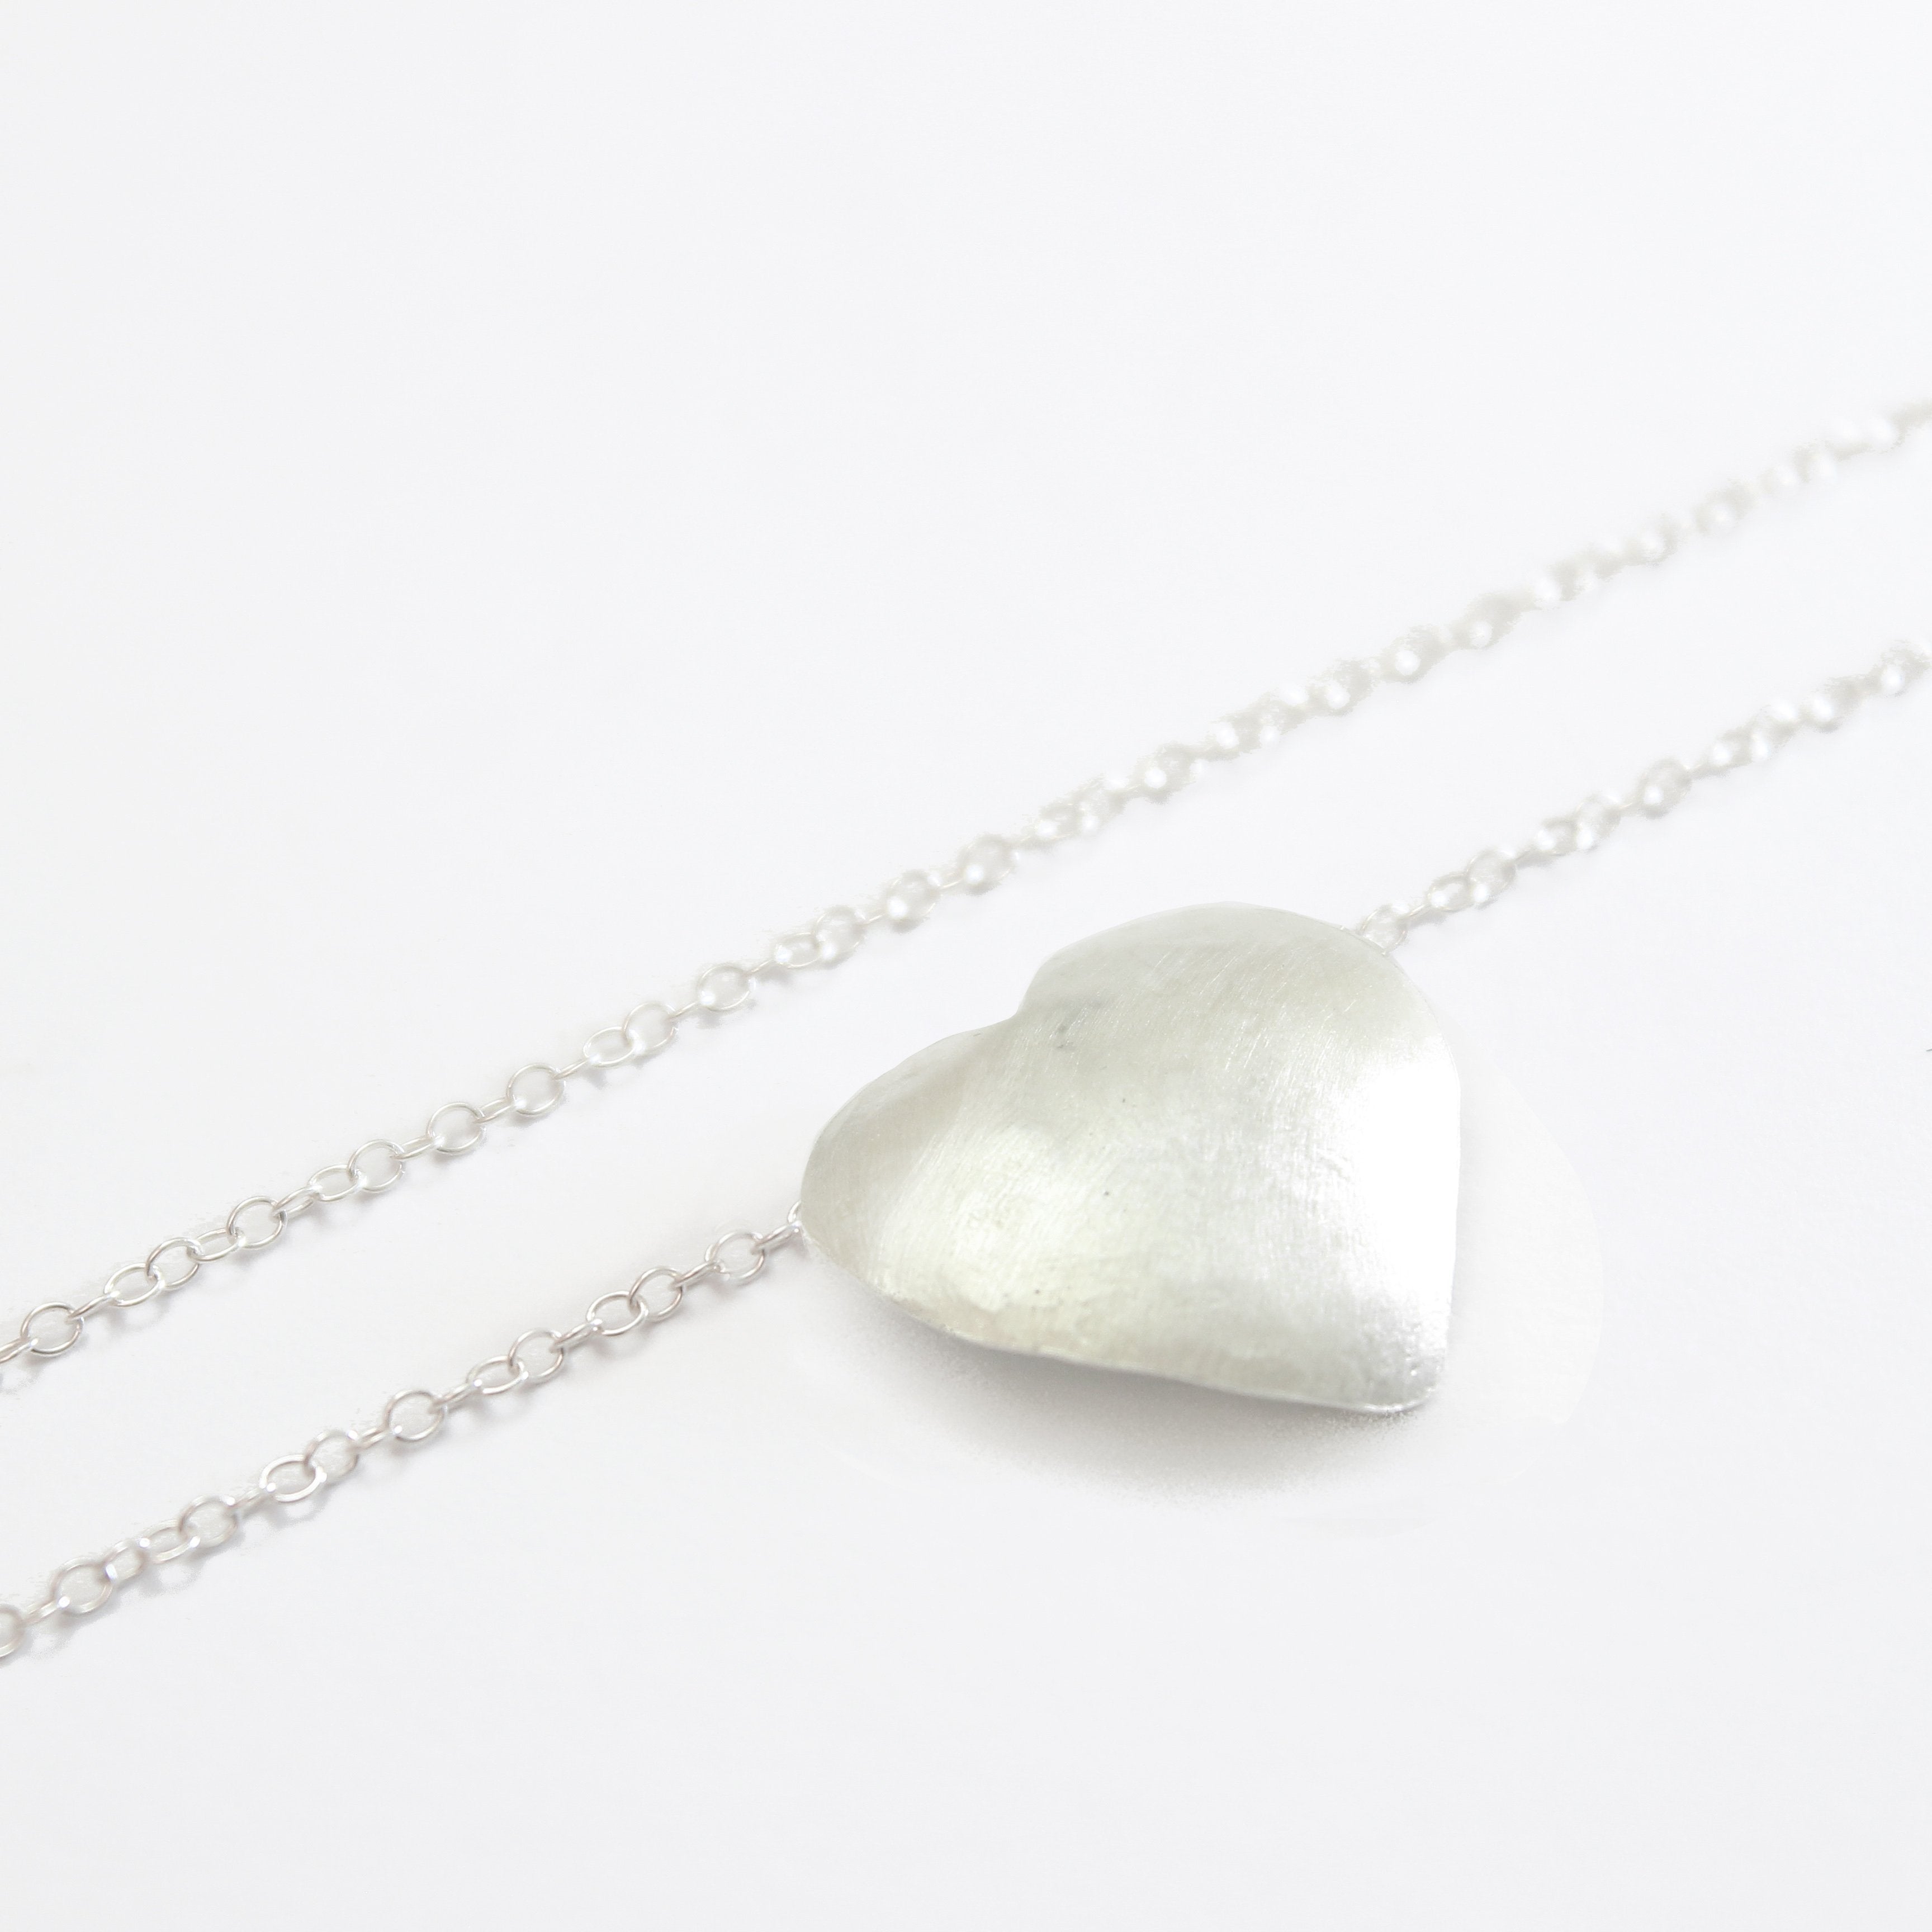 Heart Silver Necklace - Shulamit Kanter Official Store